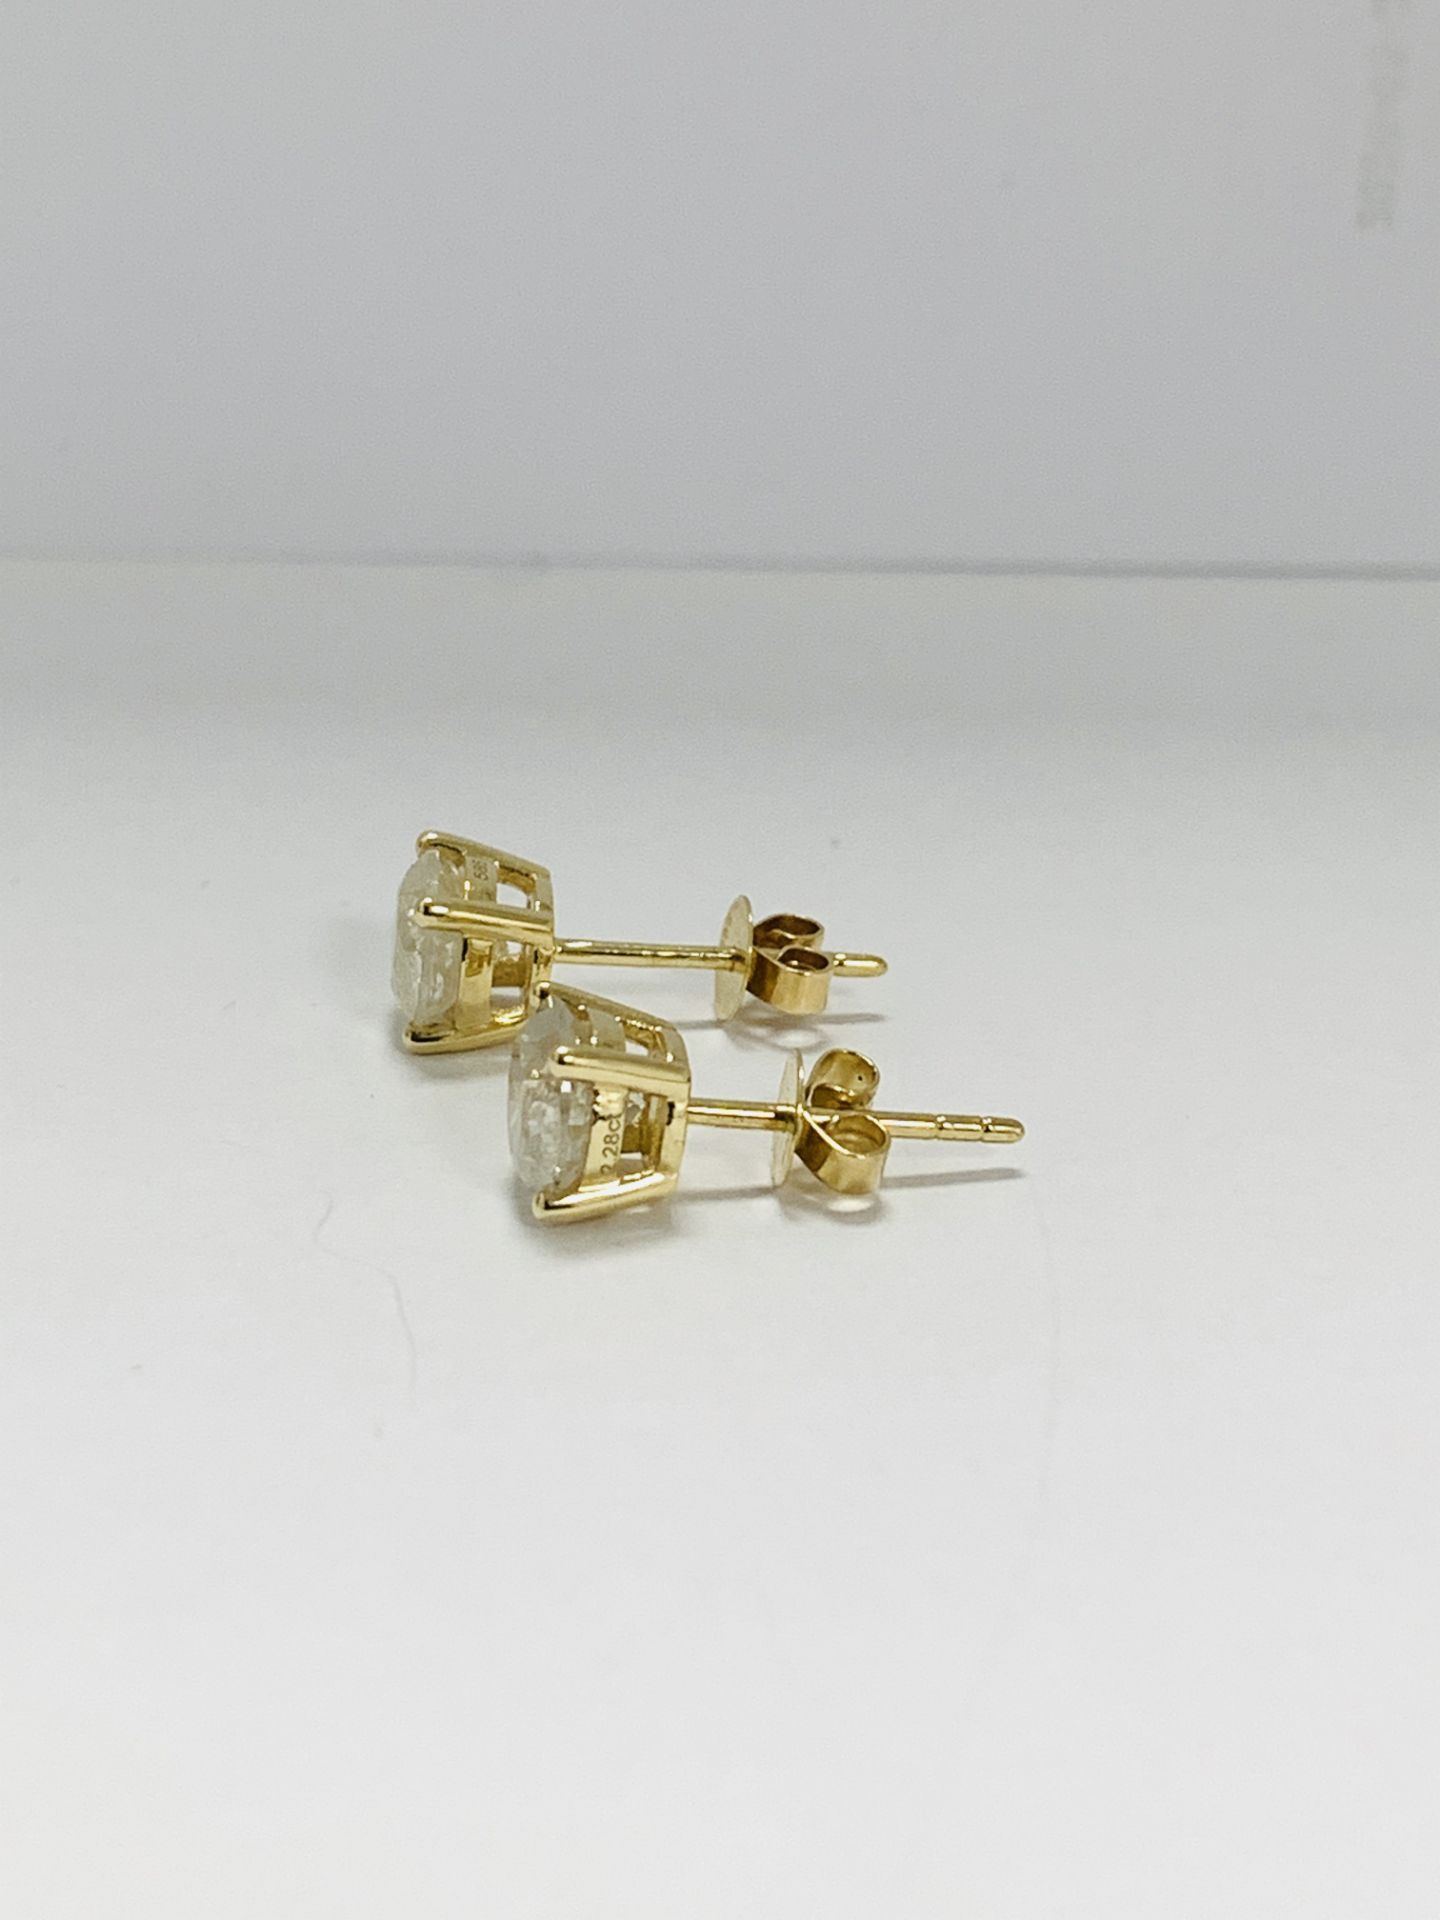 14Ct Yellow Gold Pair Of Earrings - Image 2 of 9